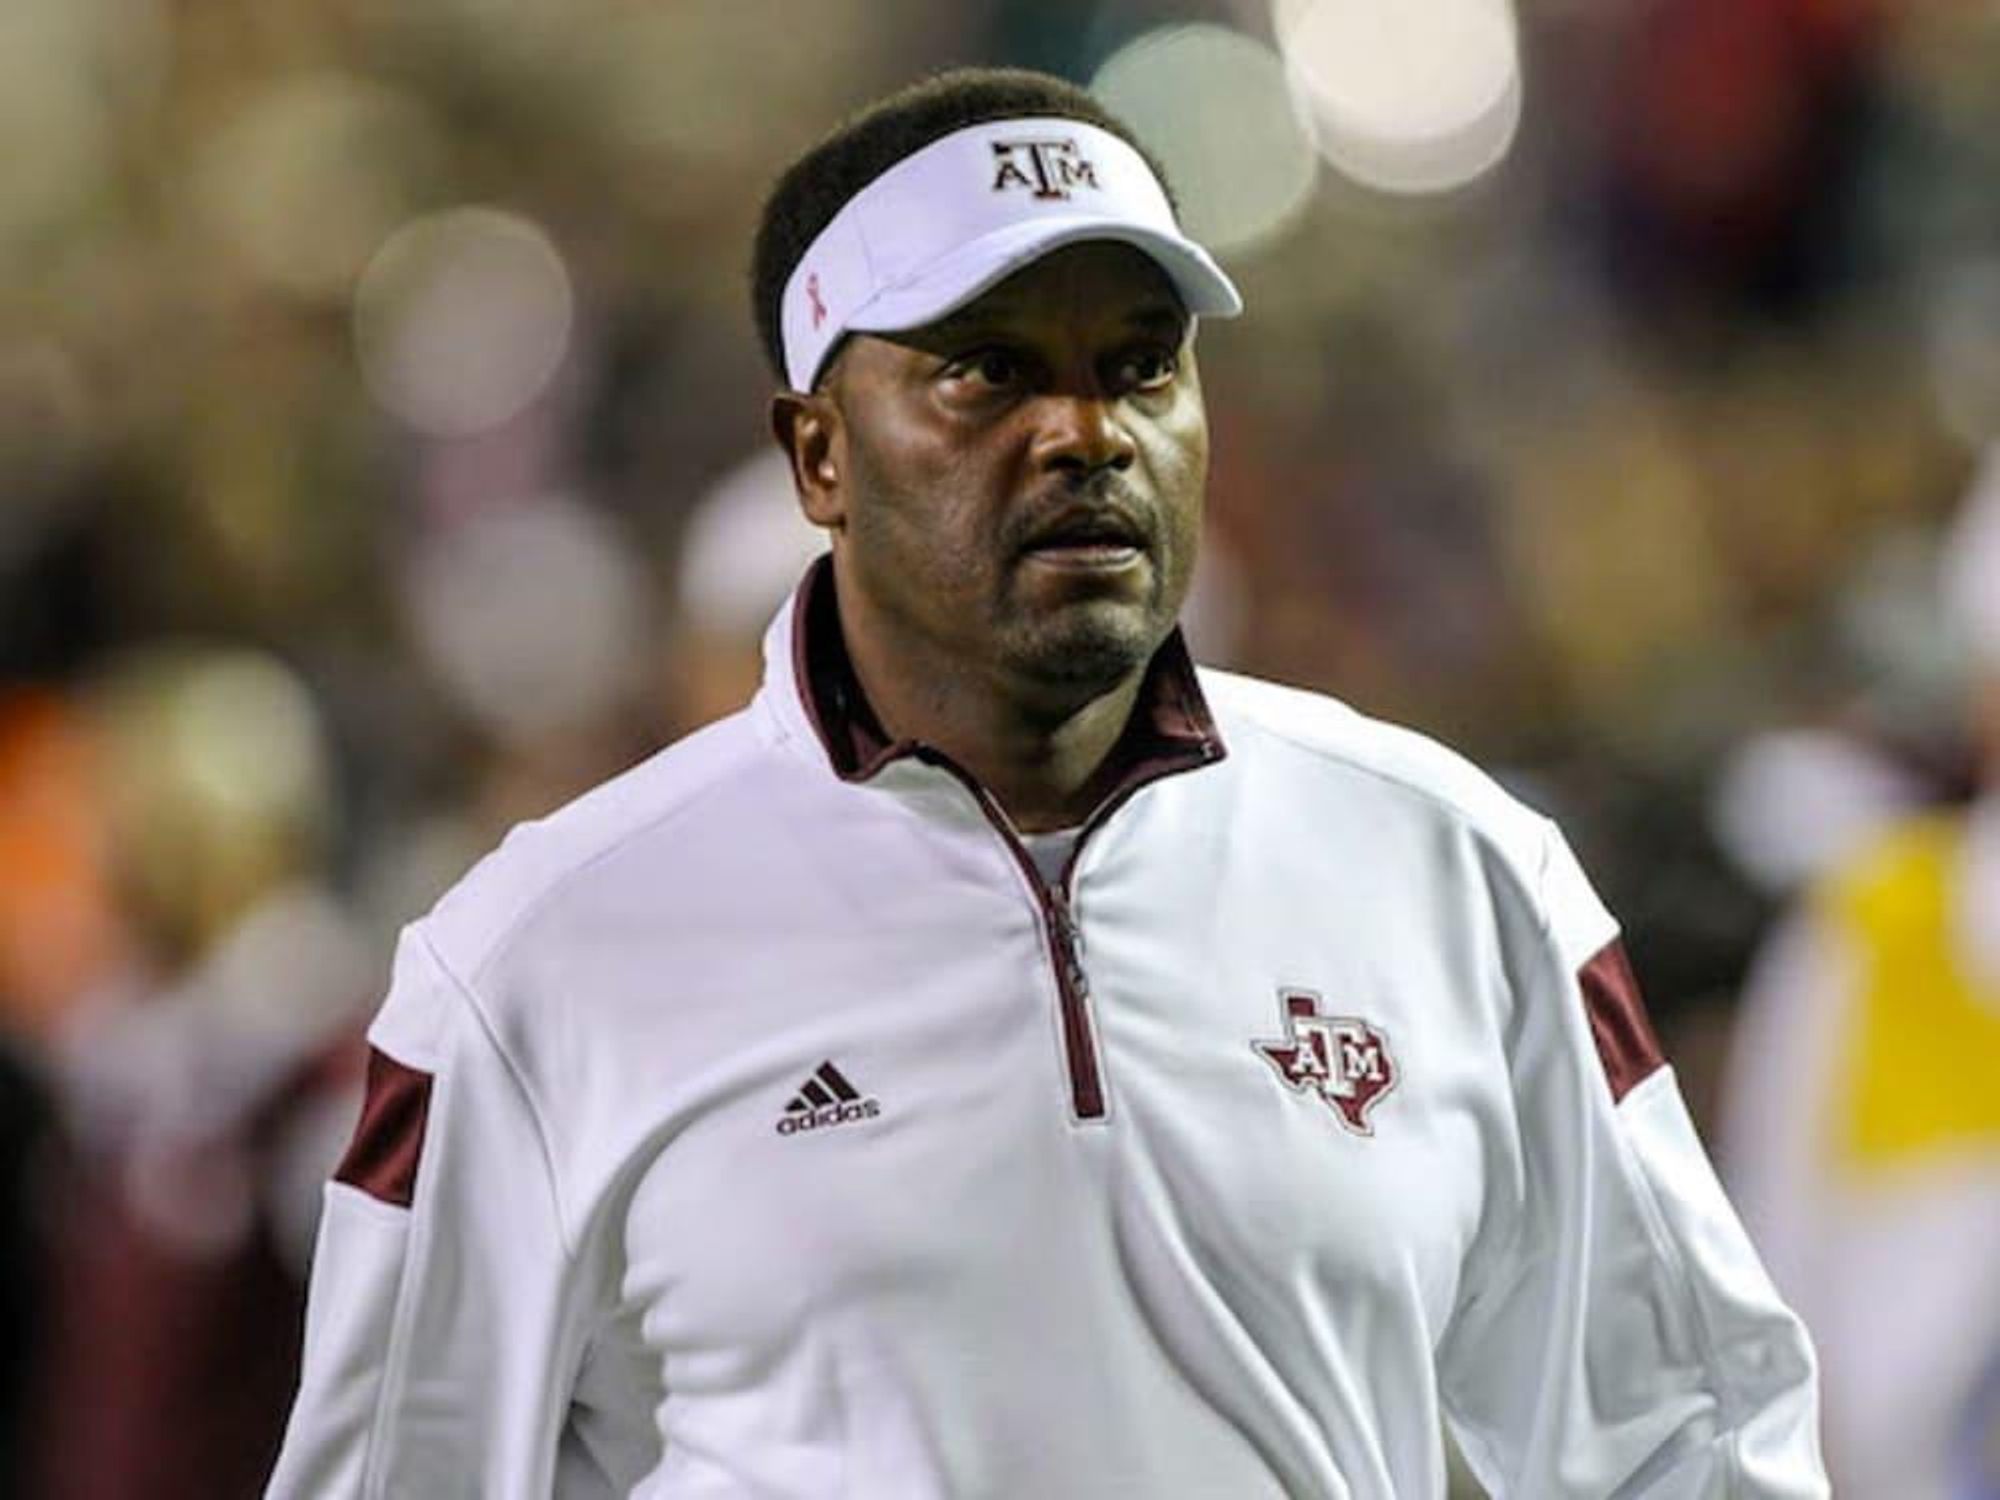 Houston, hottest college football coach in Texas, August 2015, Kevin Sumlin